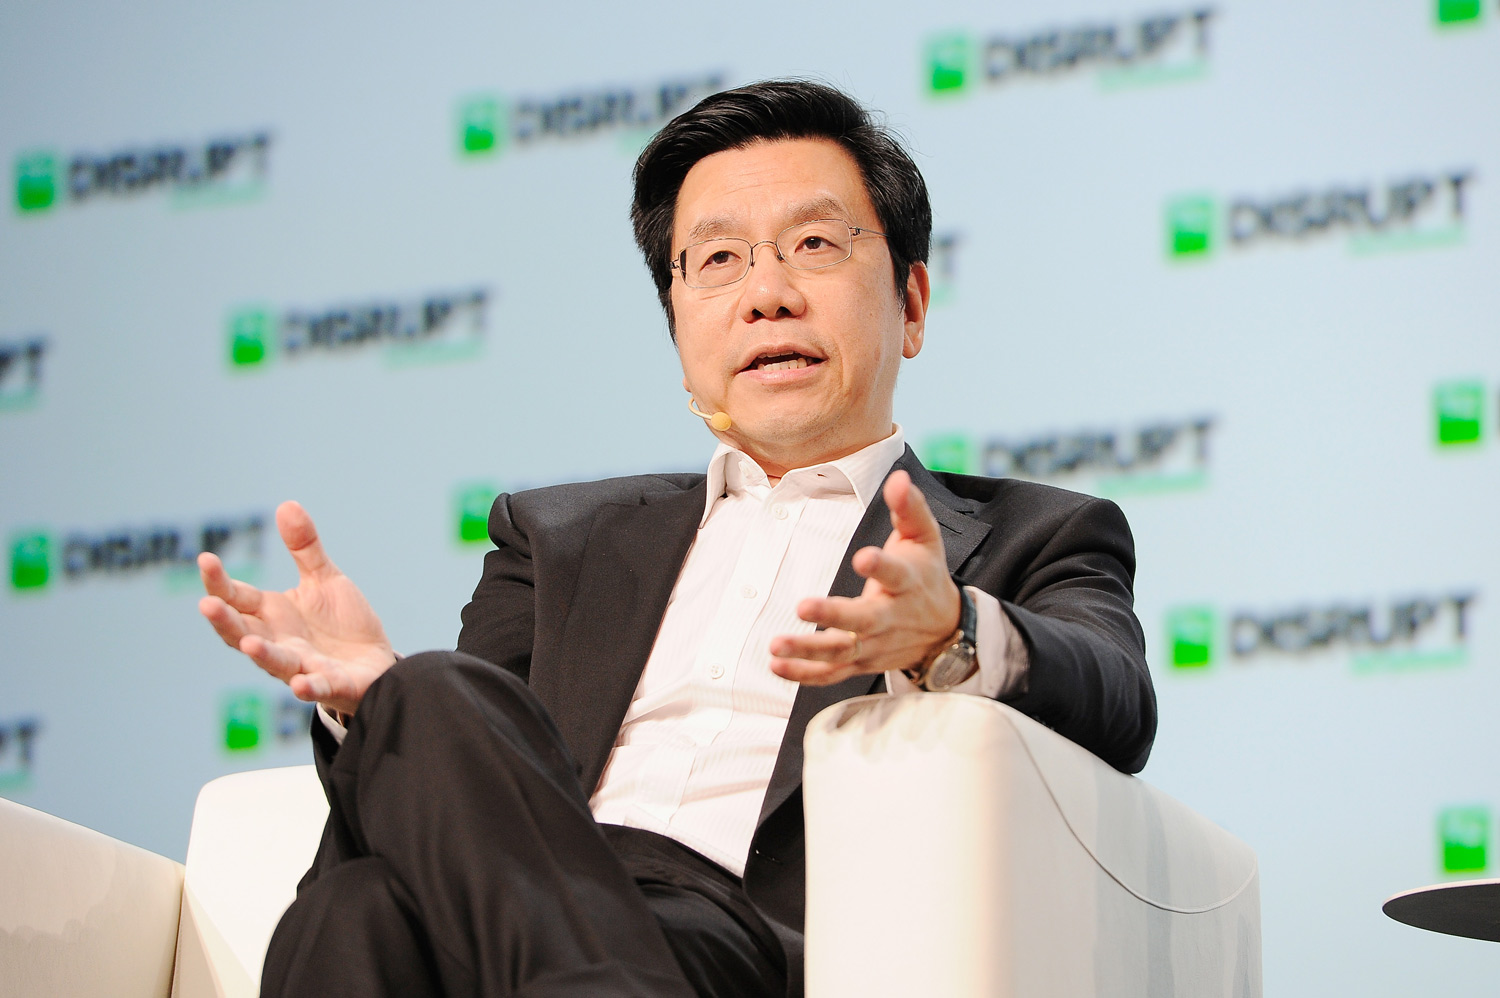 Kai-Fu Lee, author and former head of Google in China